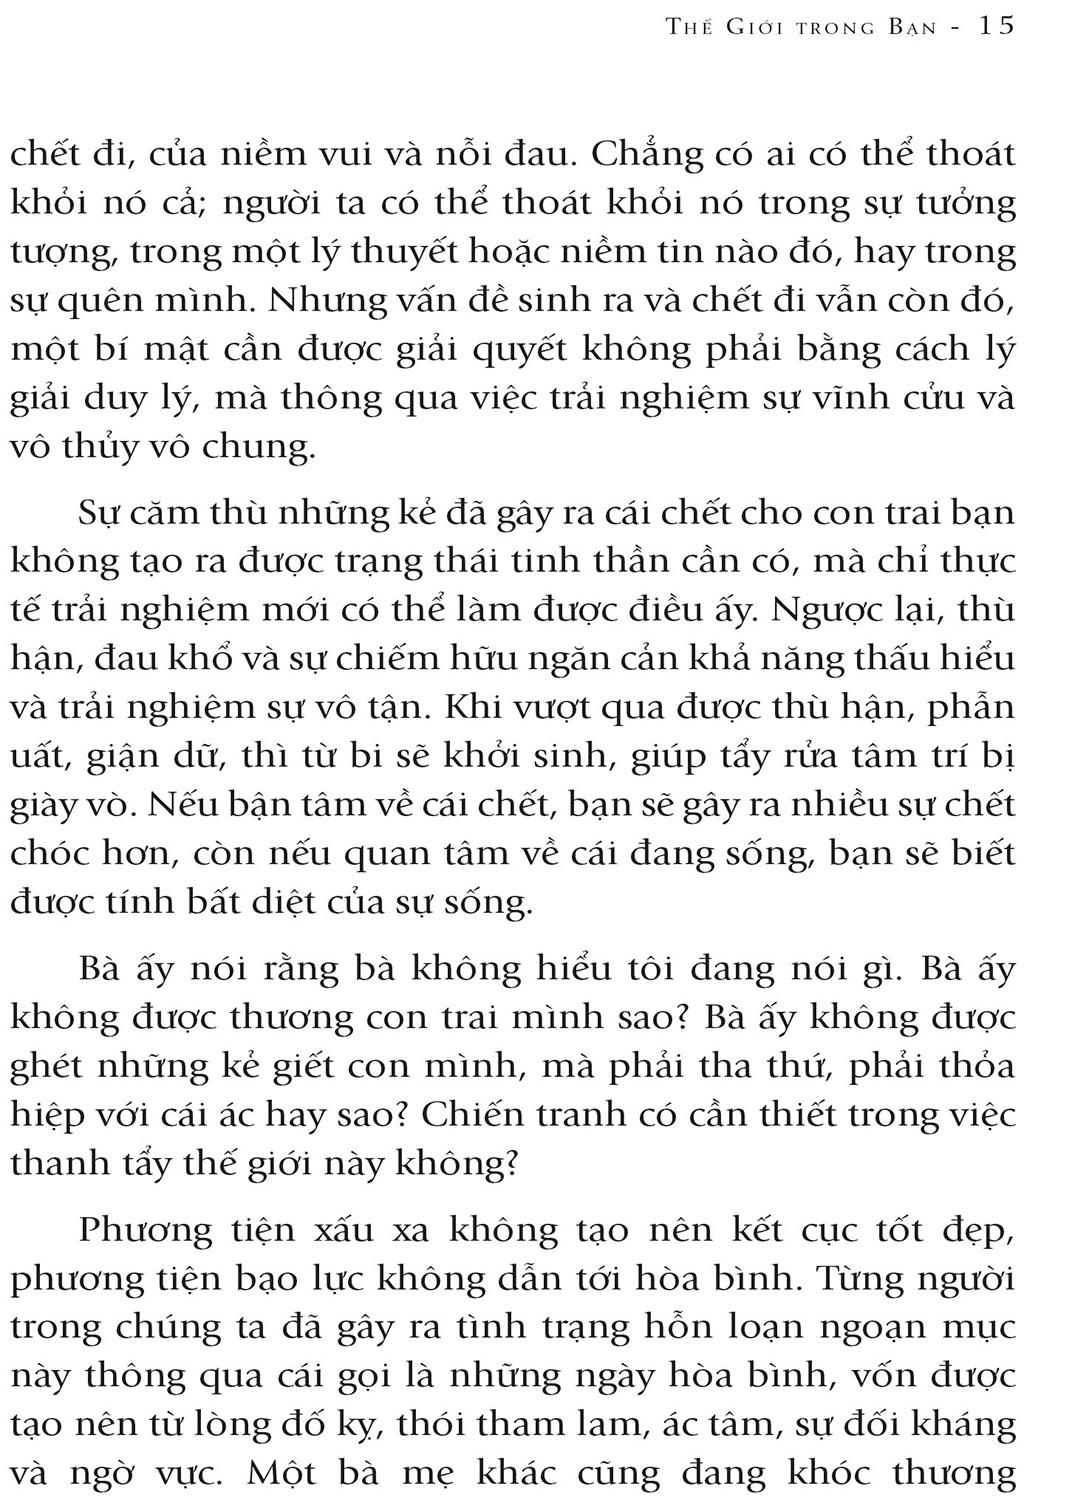 Thế Giới Trong Bạn - The World Within